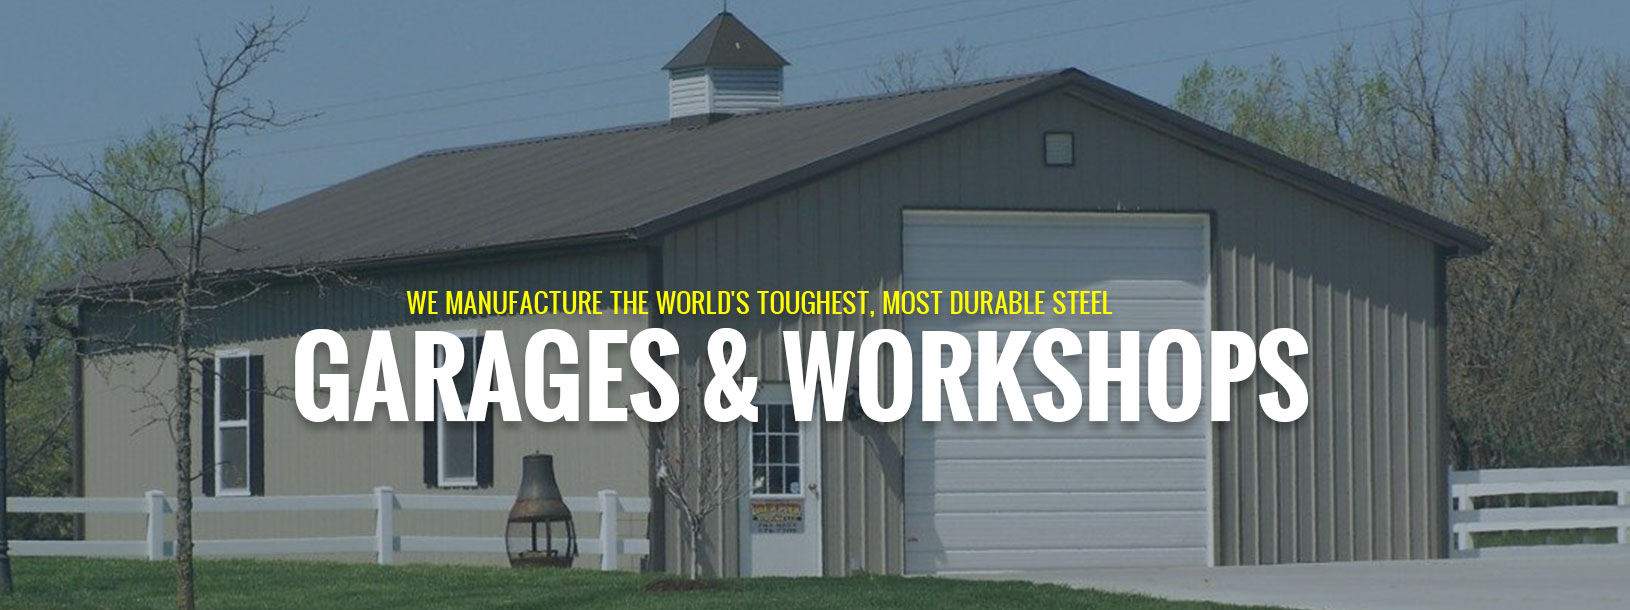 We manufacture the world's toughest, most durable steel garages & workshops